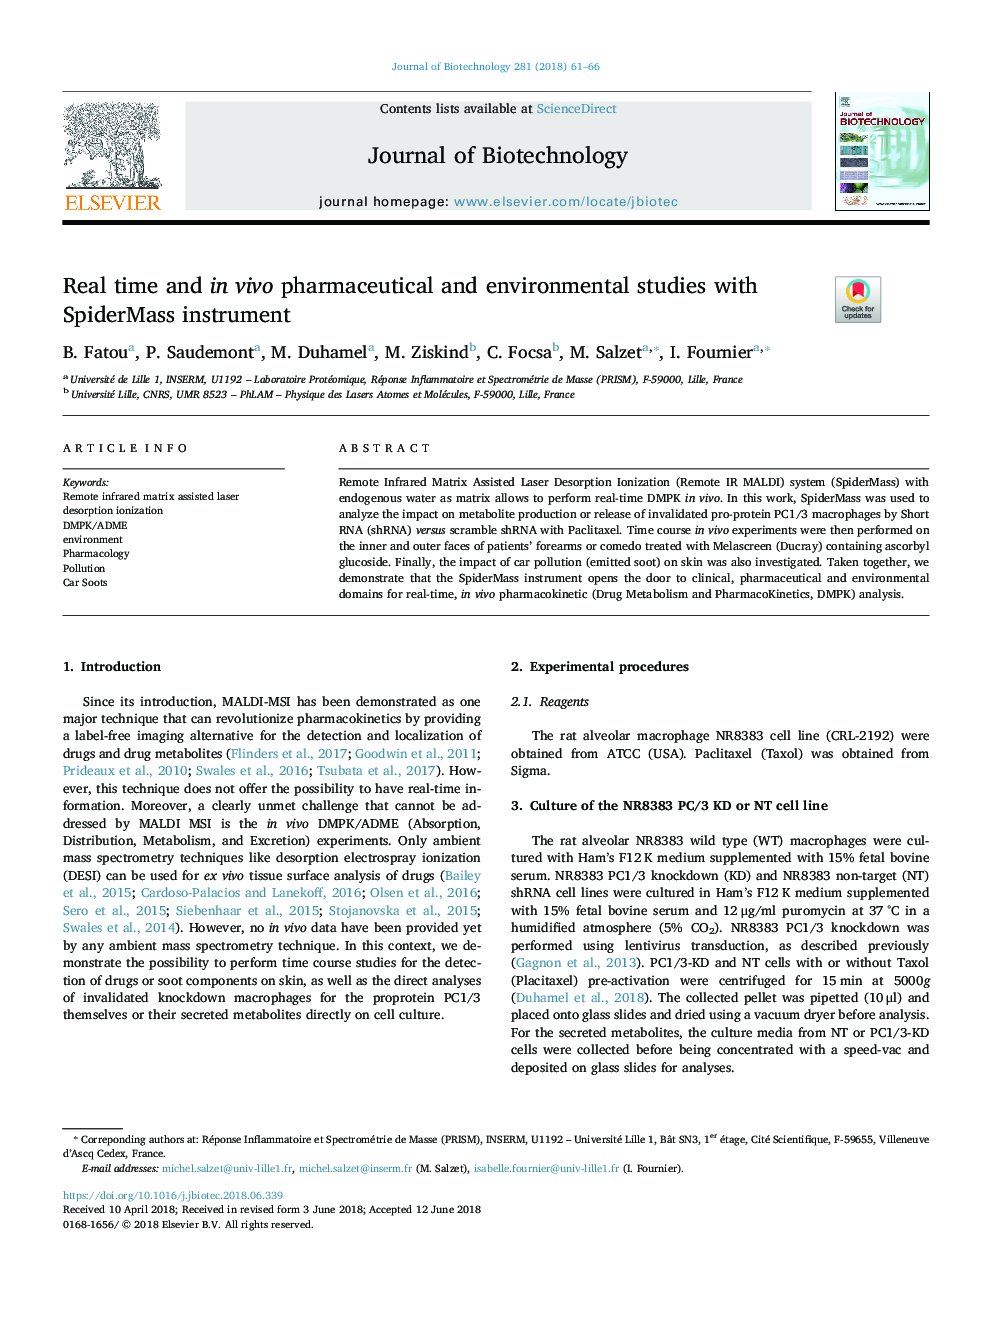 Real time and in vivo pharmaceutical and environmental studies with SpiderMass instrument